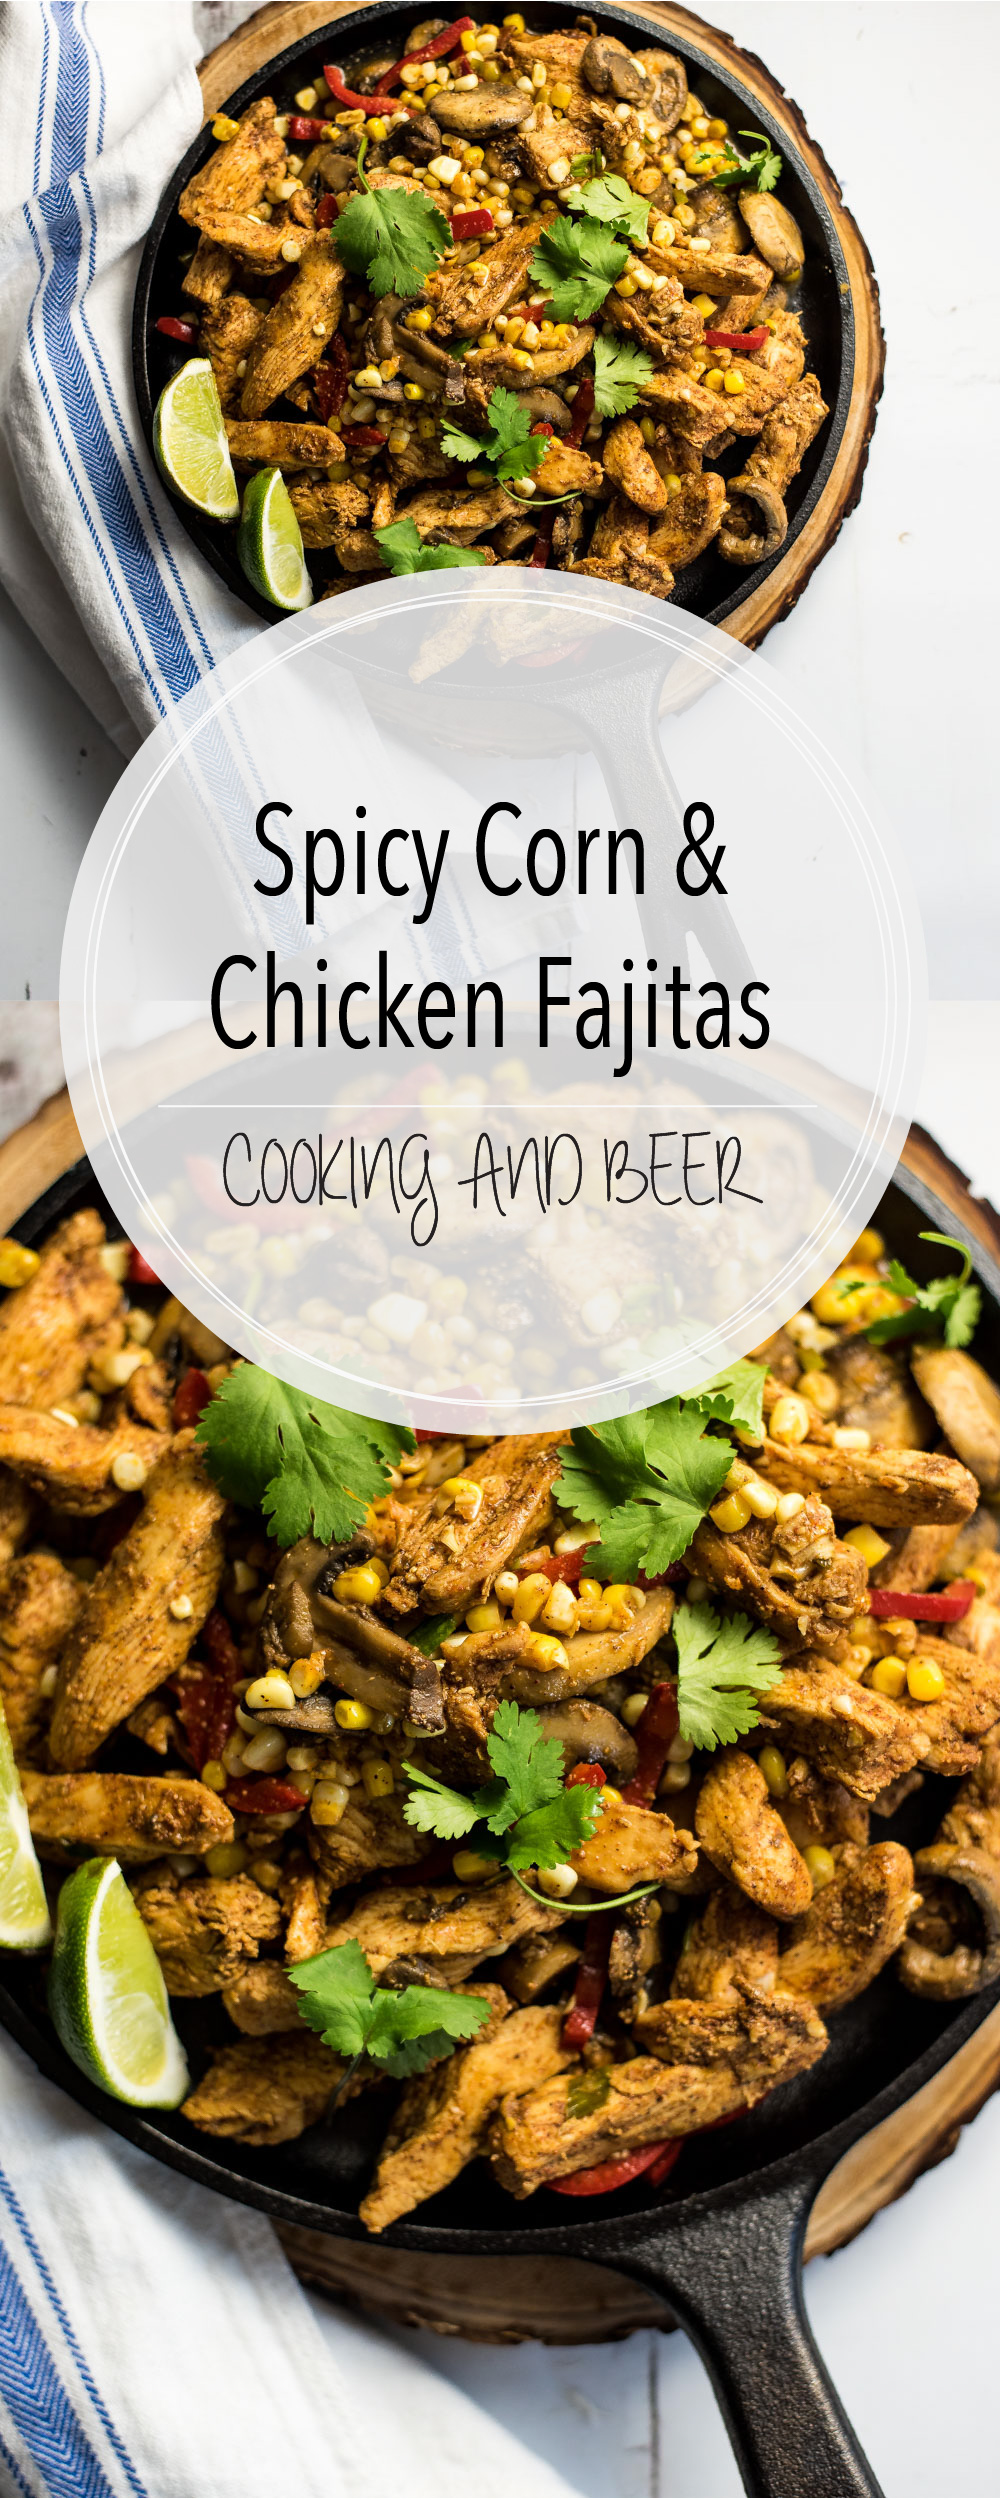 These spicy corn and chicken fajitas are bursting with bold flavors. They are on the table in under an hour and are the perfect weeknight meal!